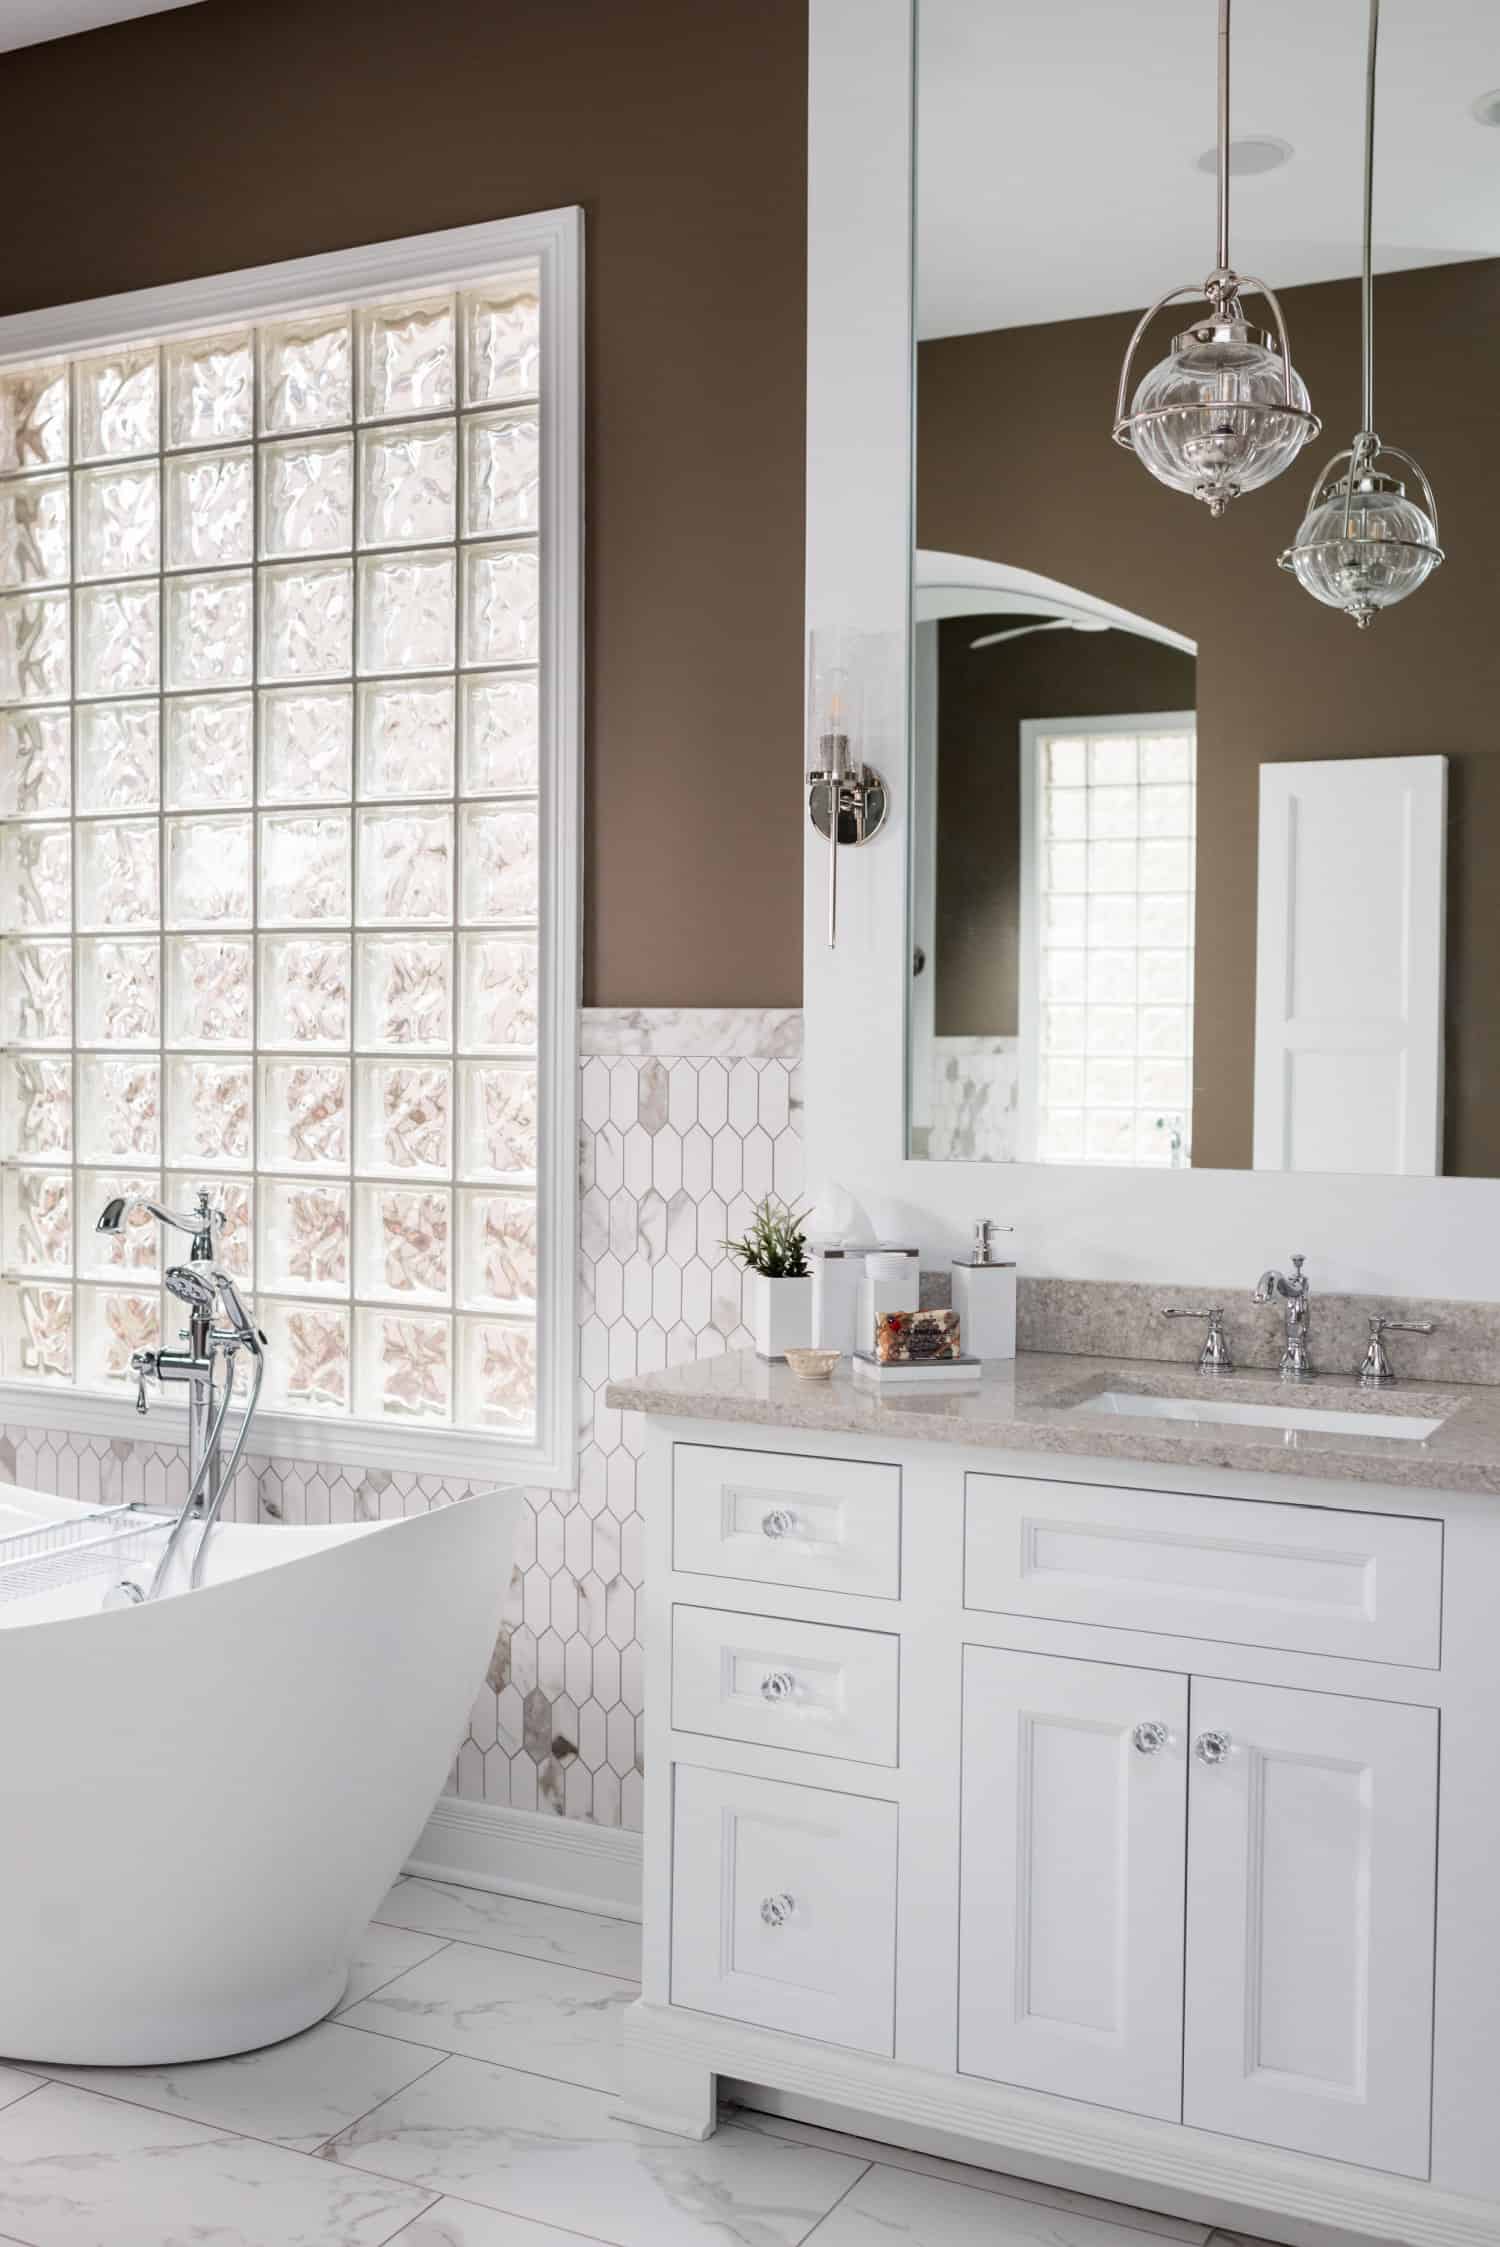 Nicholas Design Build | A bathroom oasis with a white tub and brown walls.